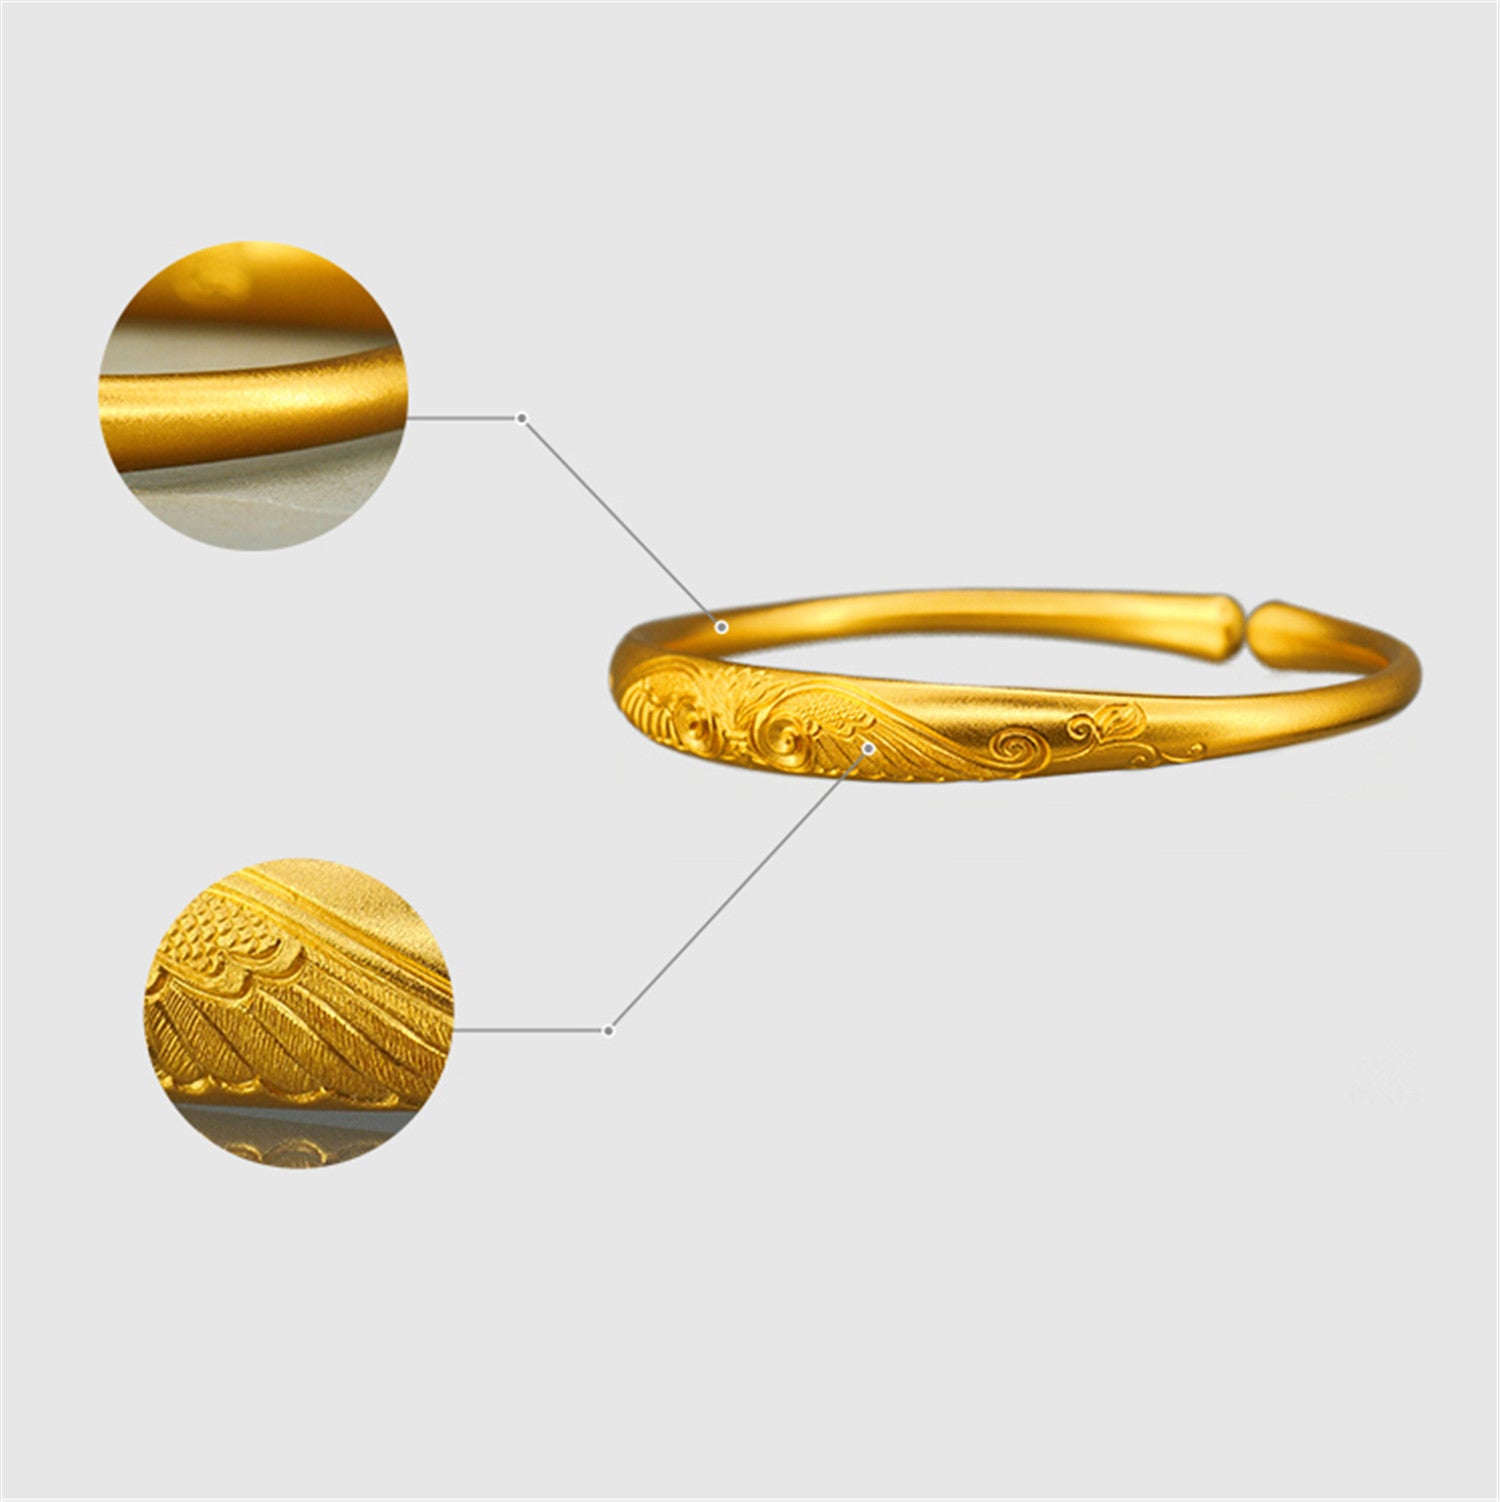 EVECOCO Full Gold Bracelet Hand Forging,Micro Relief Ancient Wing Pattern,40g